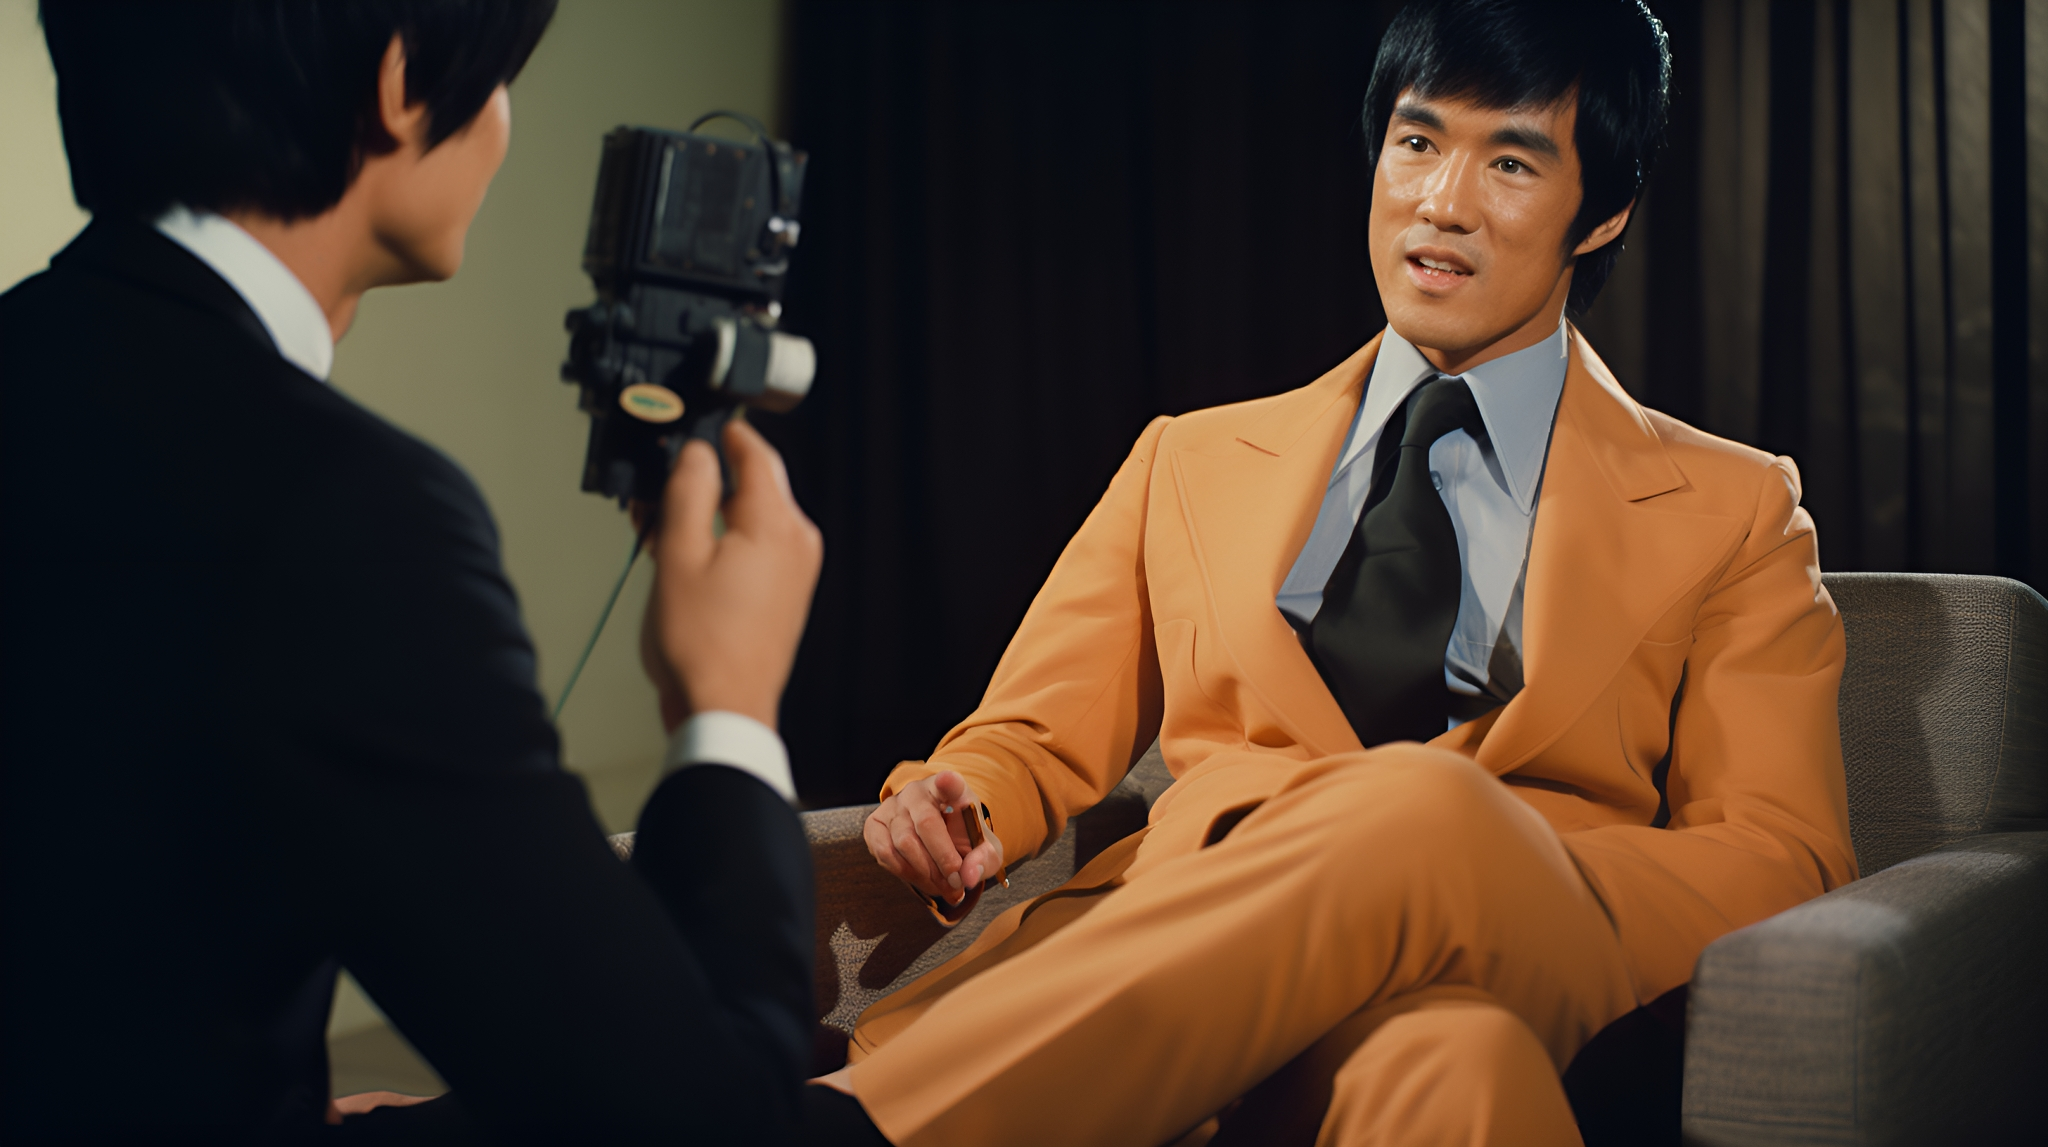 Candid still of Bruce Lee in a stylish orange suit, engaging in an interview